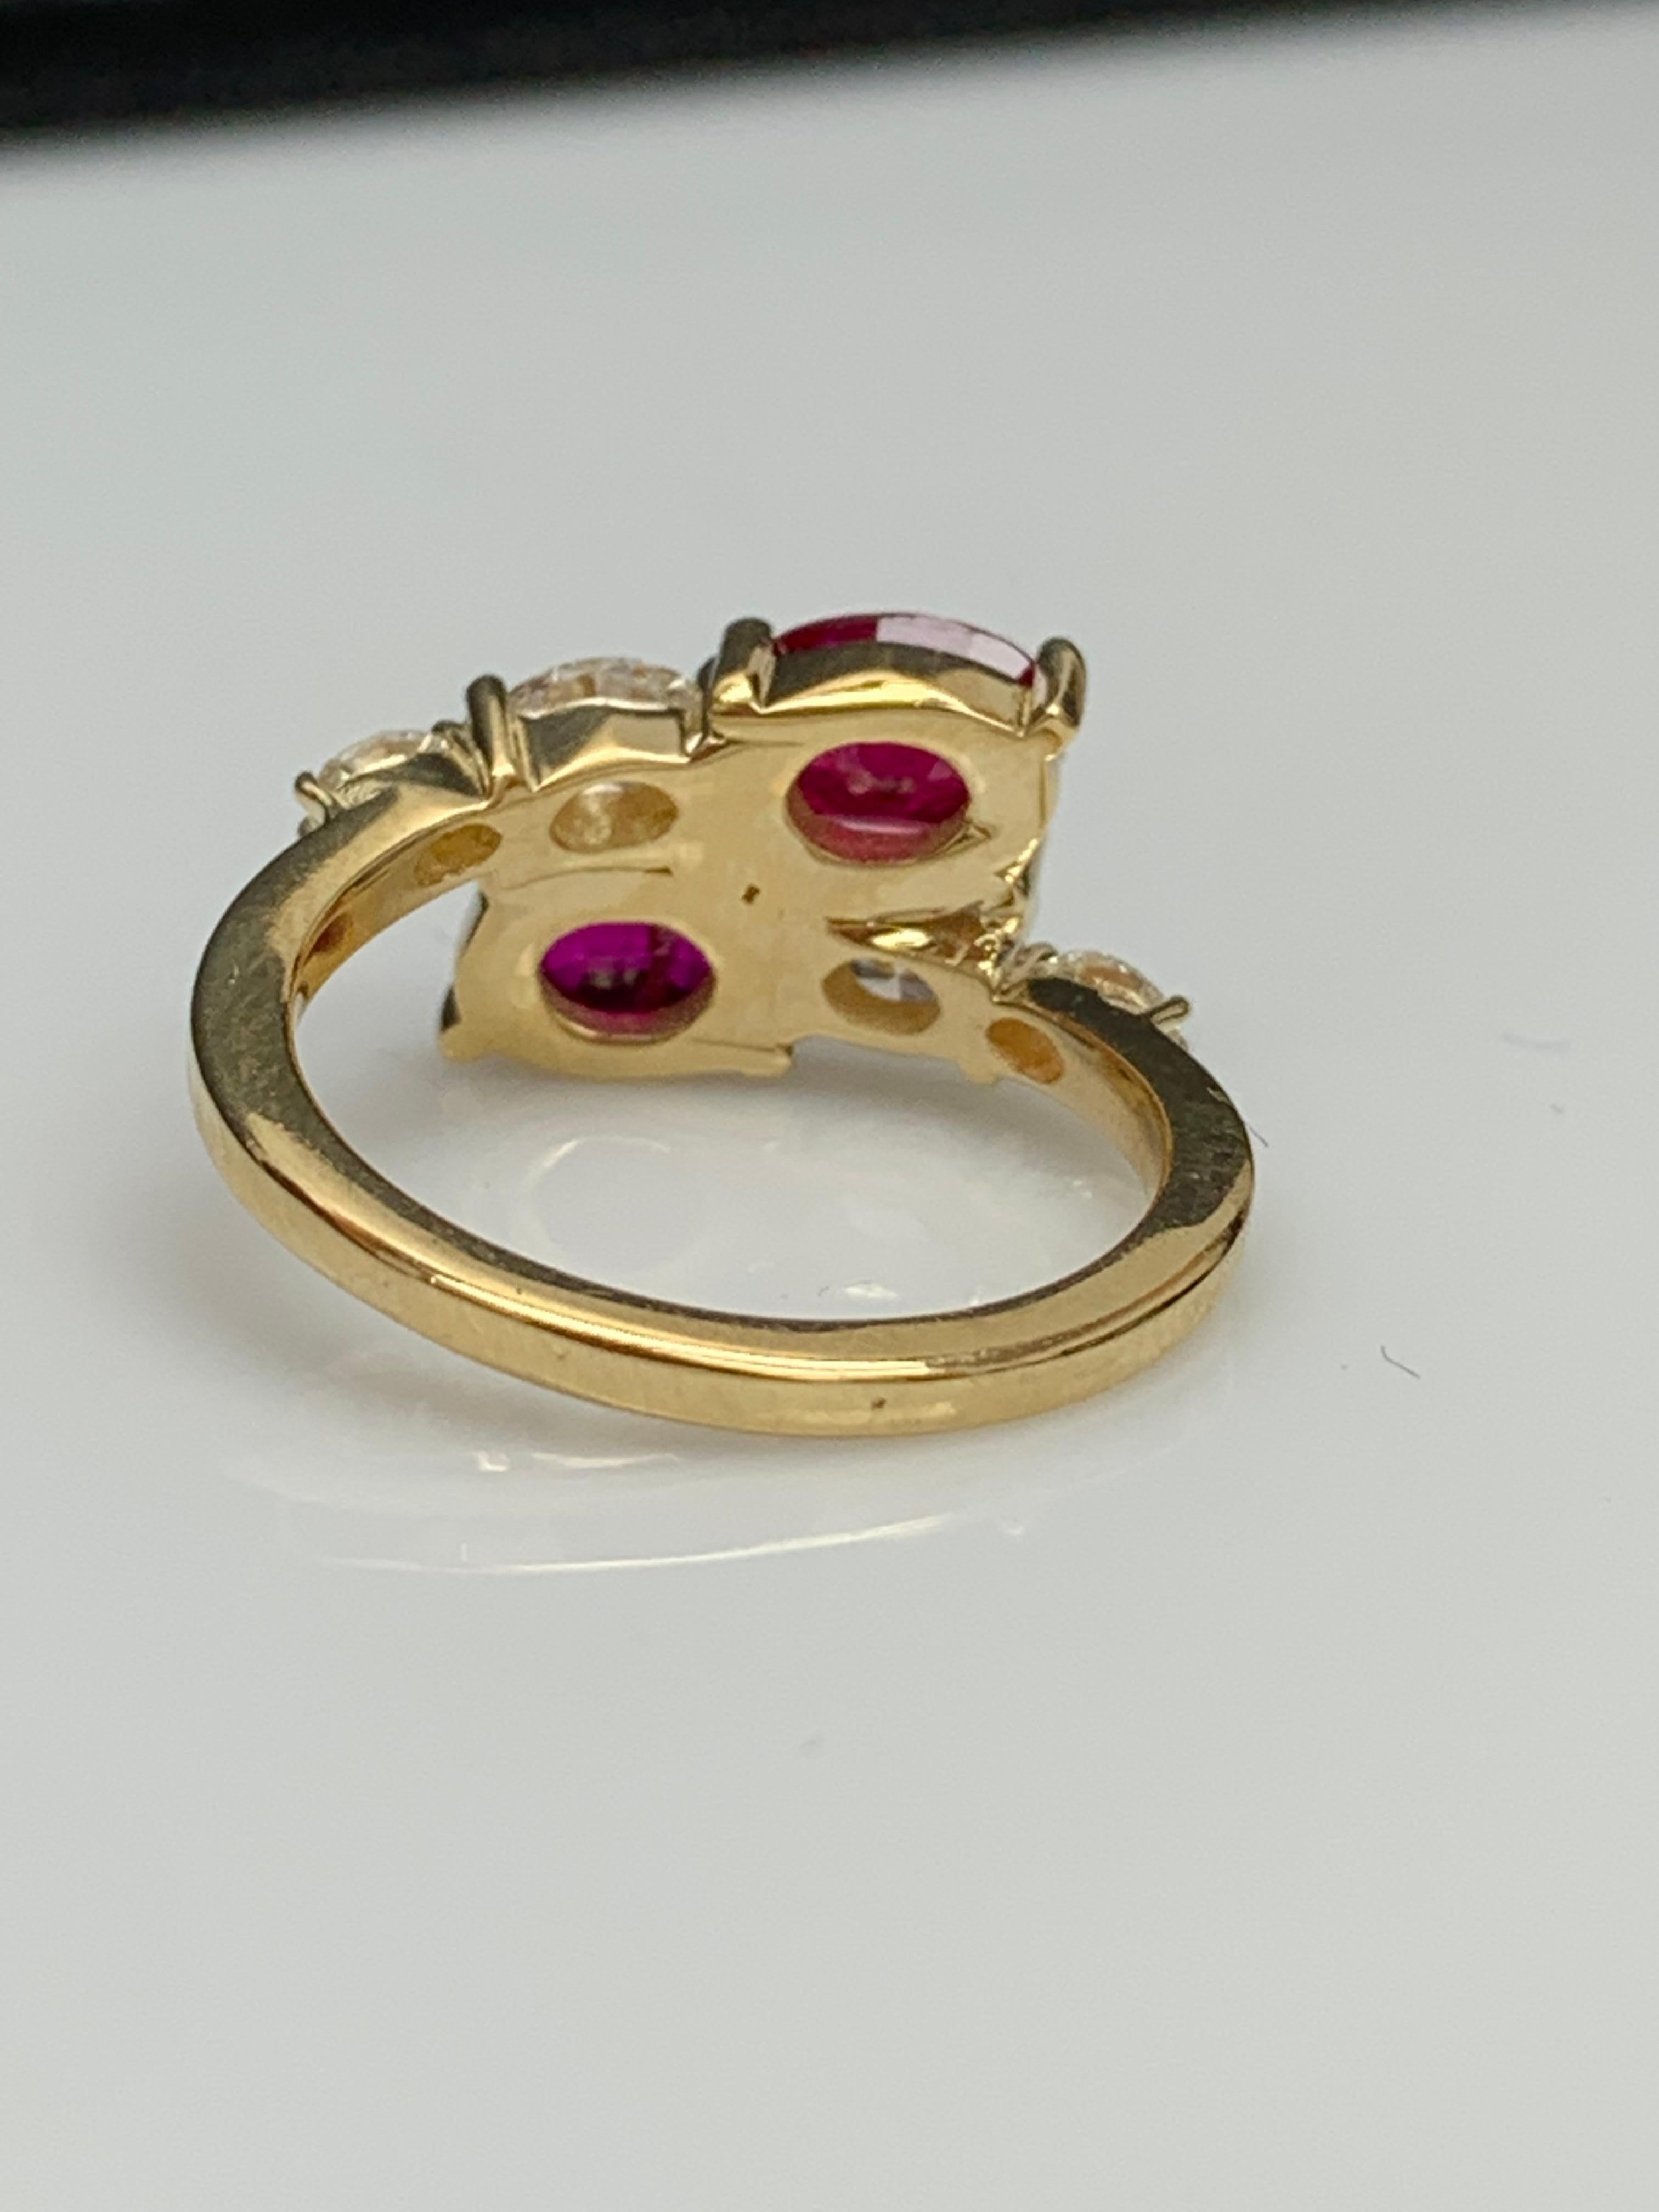 2.18 Carat Oval Cut Ruby Diamond Toi et Moi Engagement Ring in 14K Yellow Gold For Sale 9